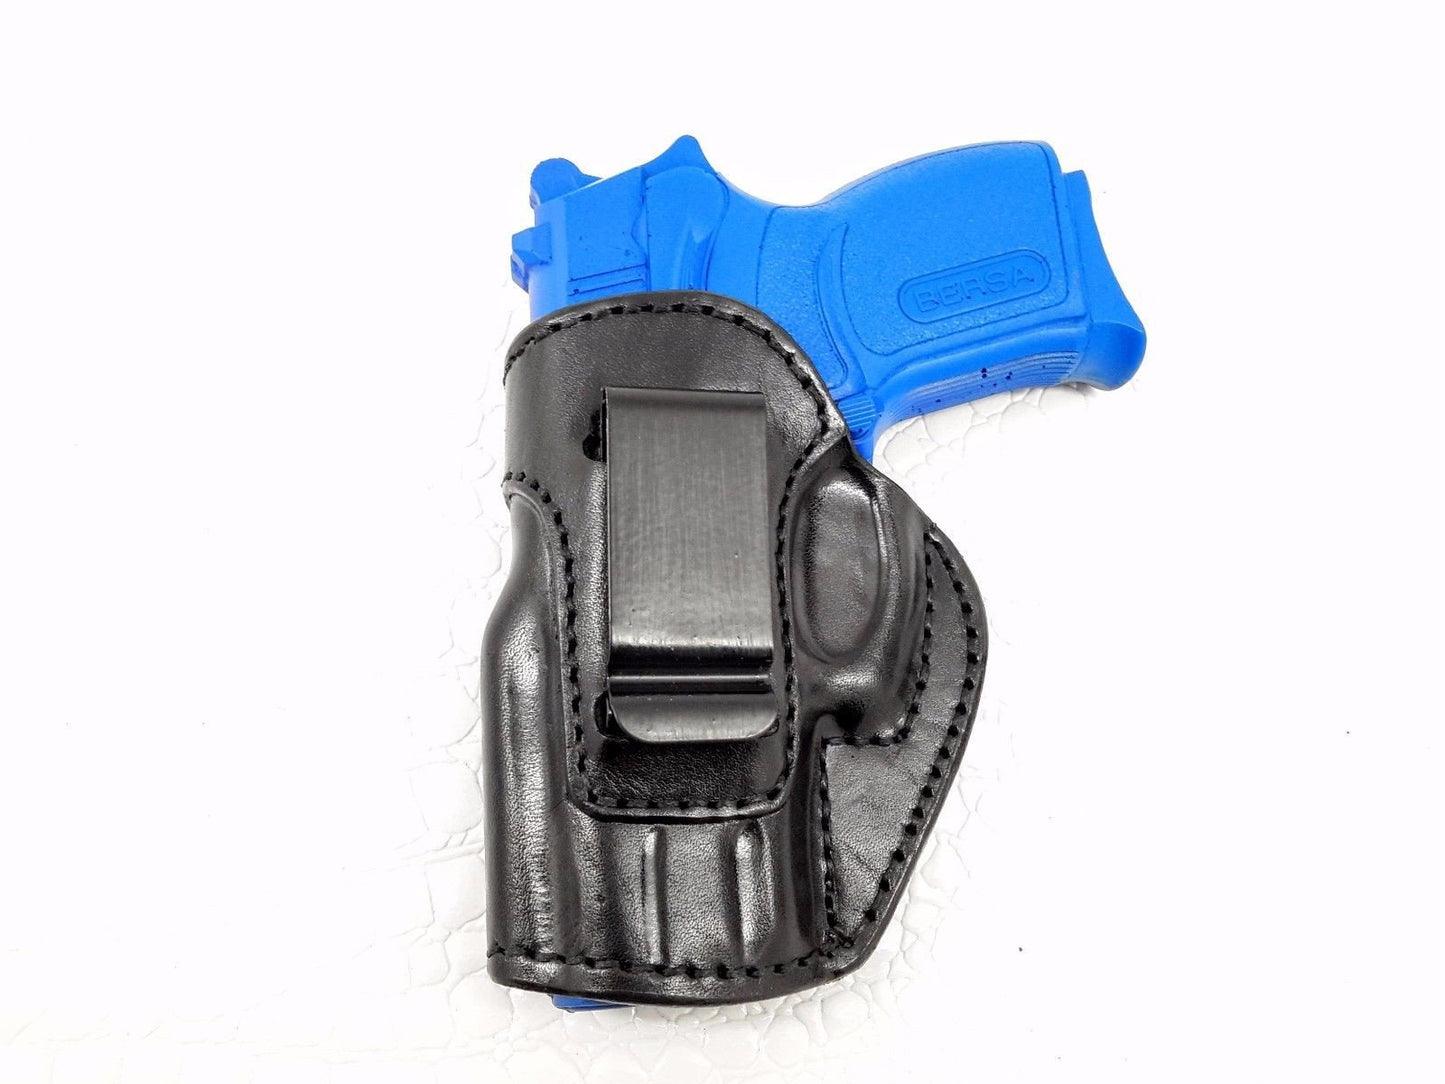 Smith & Wesson CS9 Chiefs Special 9mm IWB Inside the Waistband holster